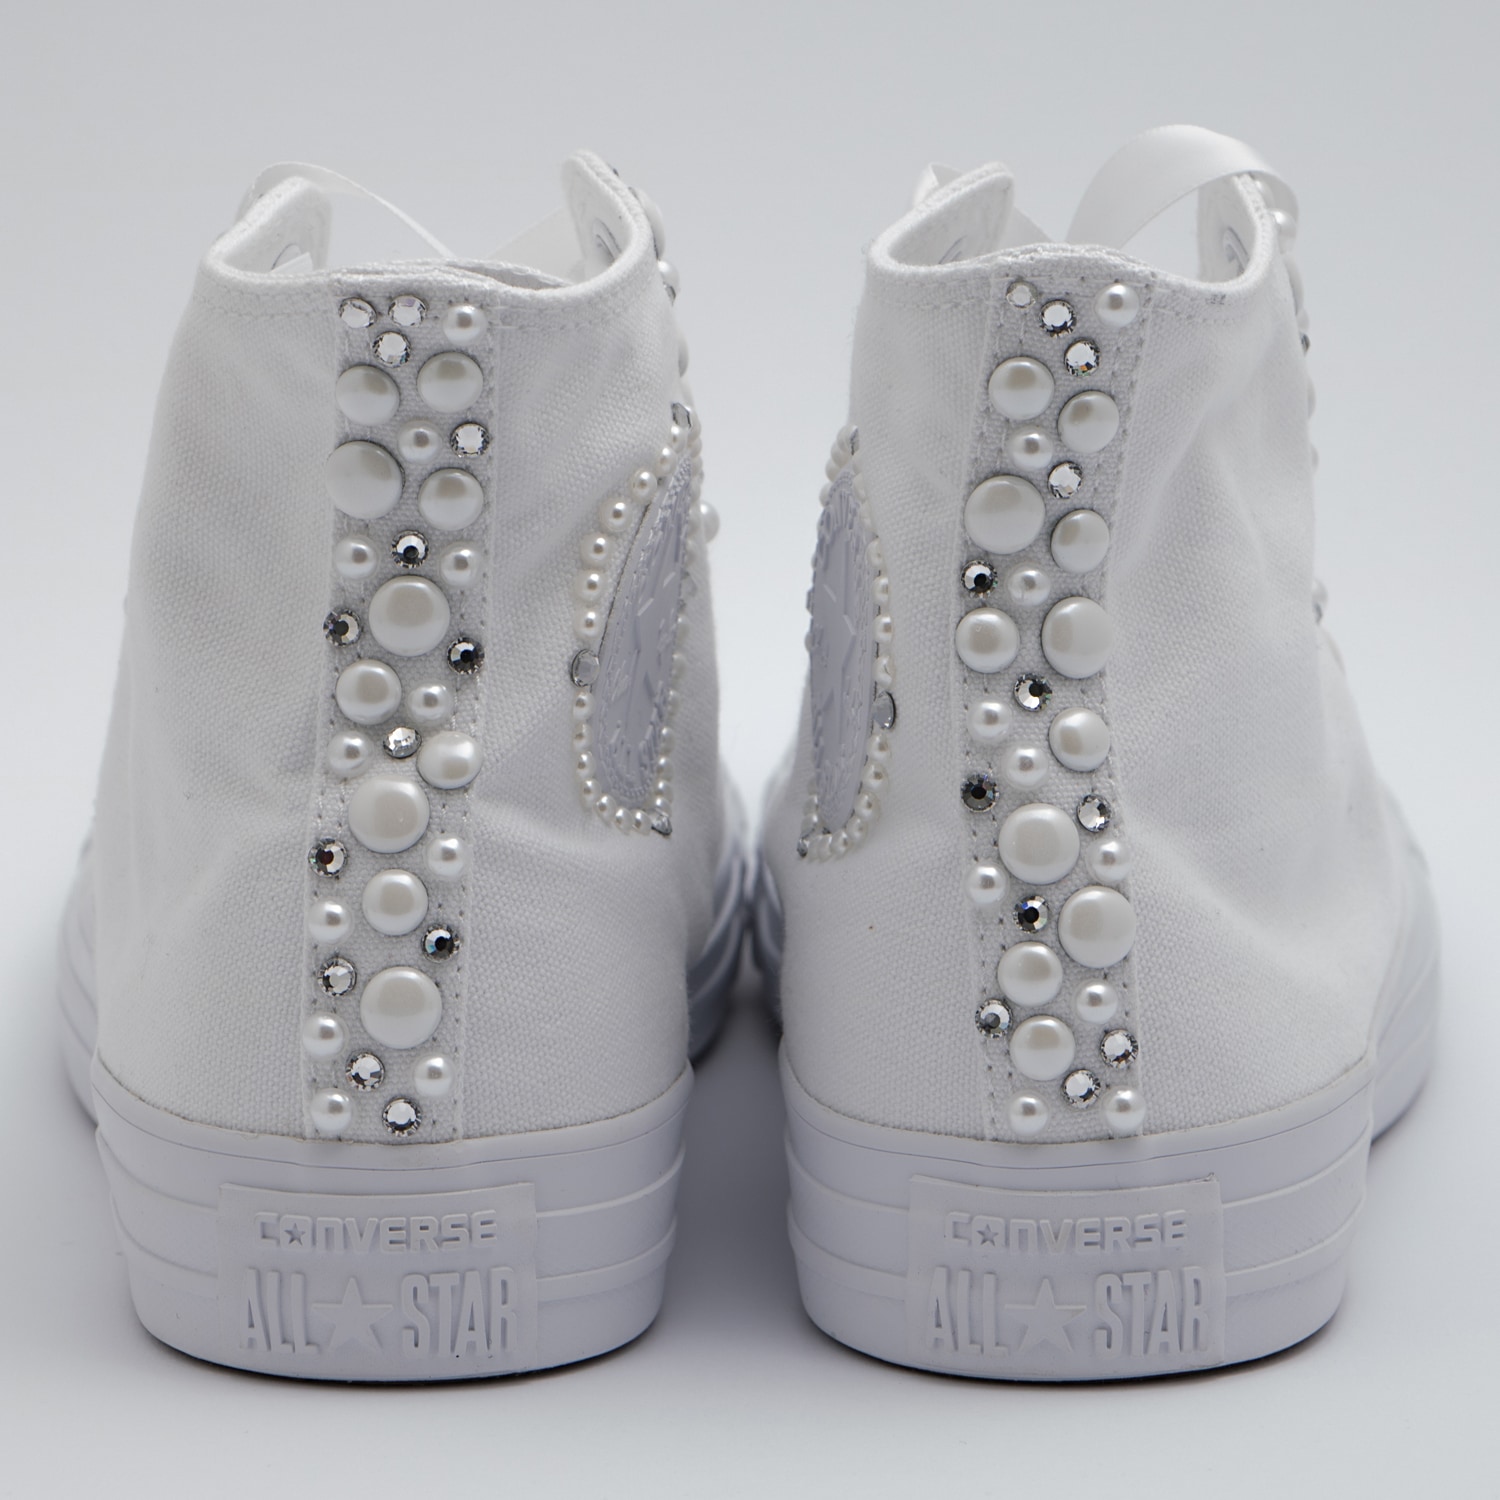 converse bianche con perle,(categoryid=32)Up to 69% OFF,marufgold.com شاي ليبتون فرط